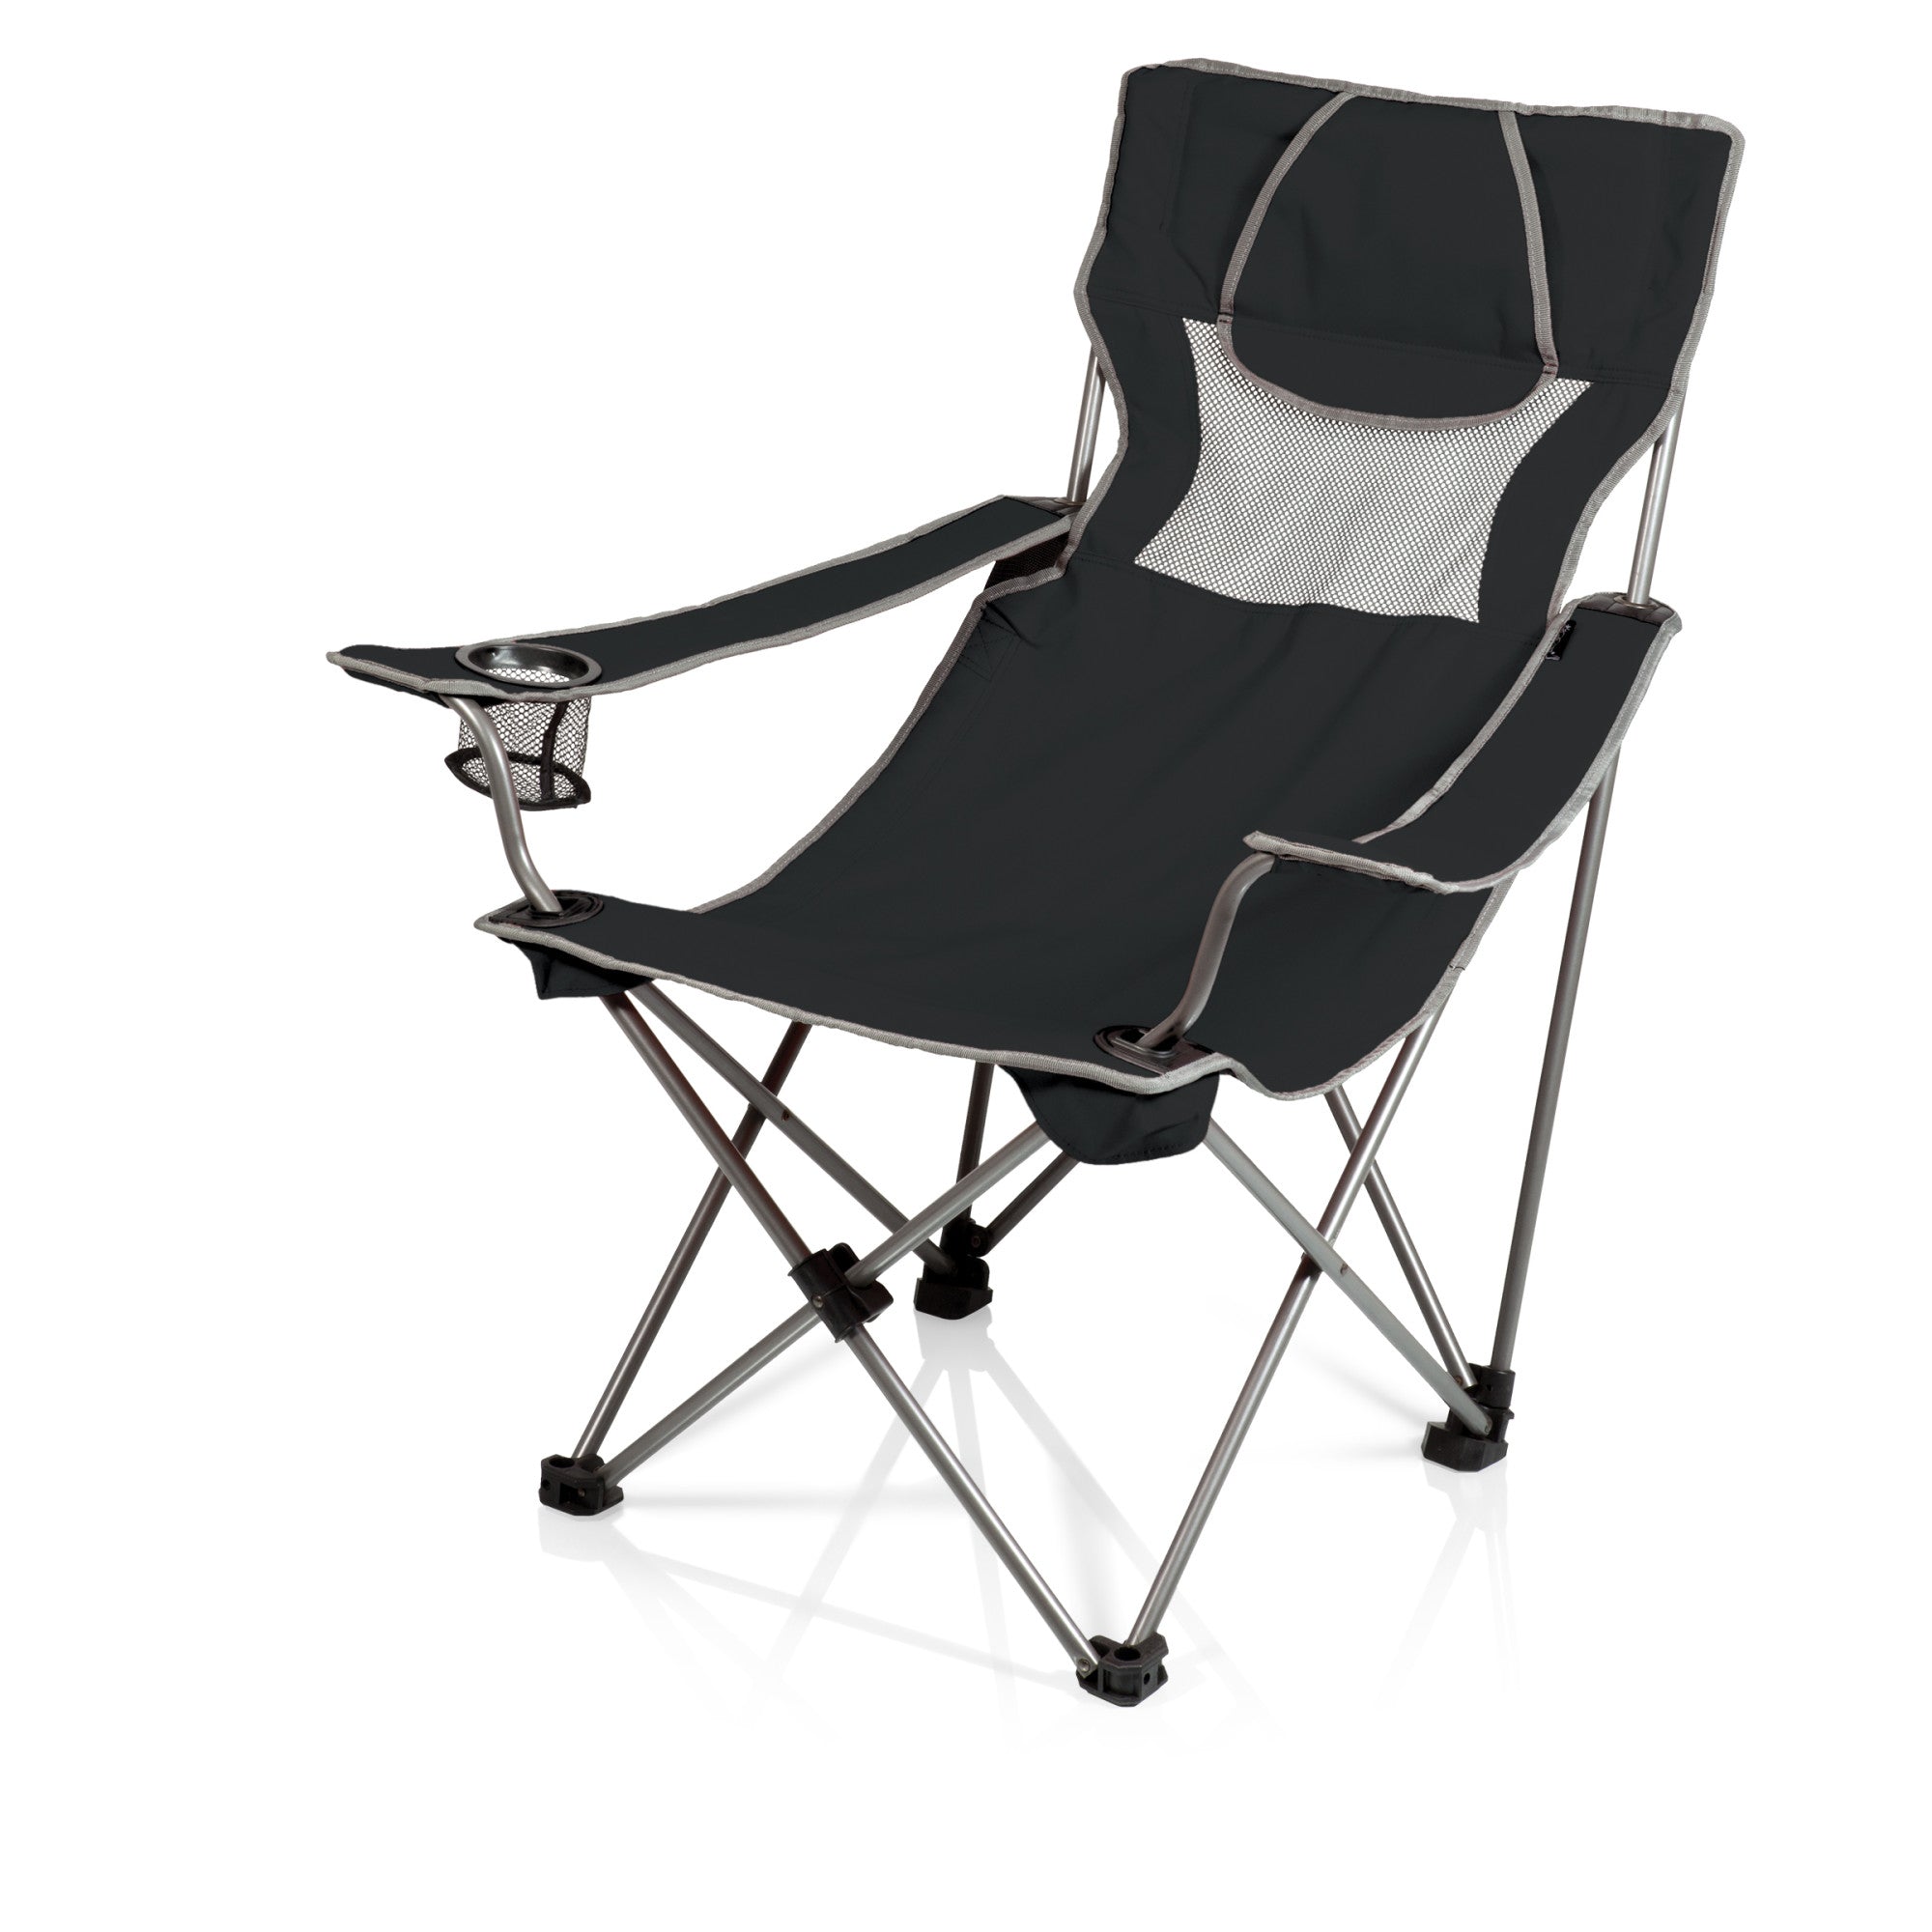 Pittsburgh Panthers - Campsite Camp Chair